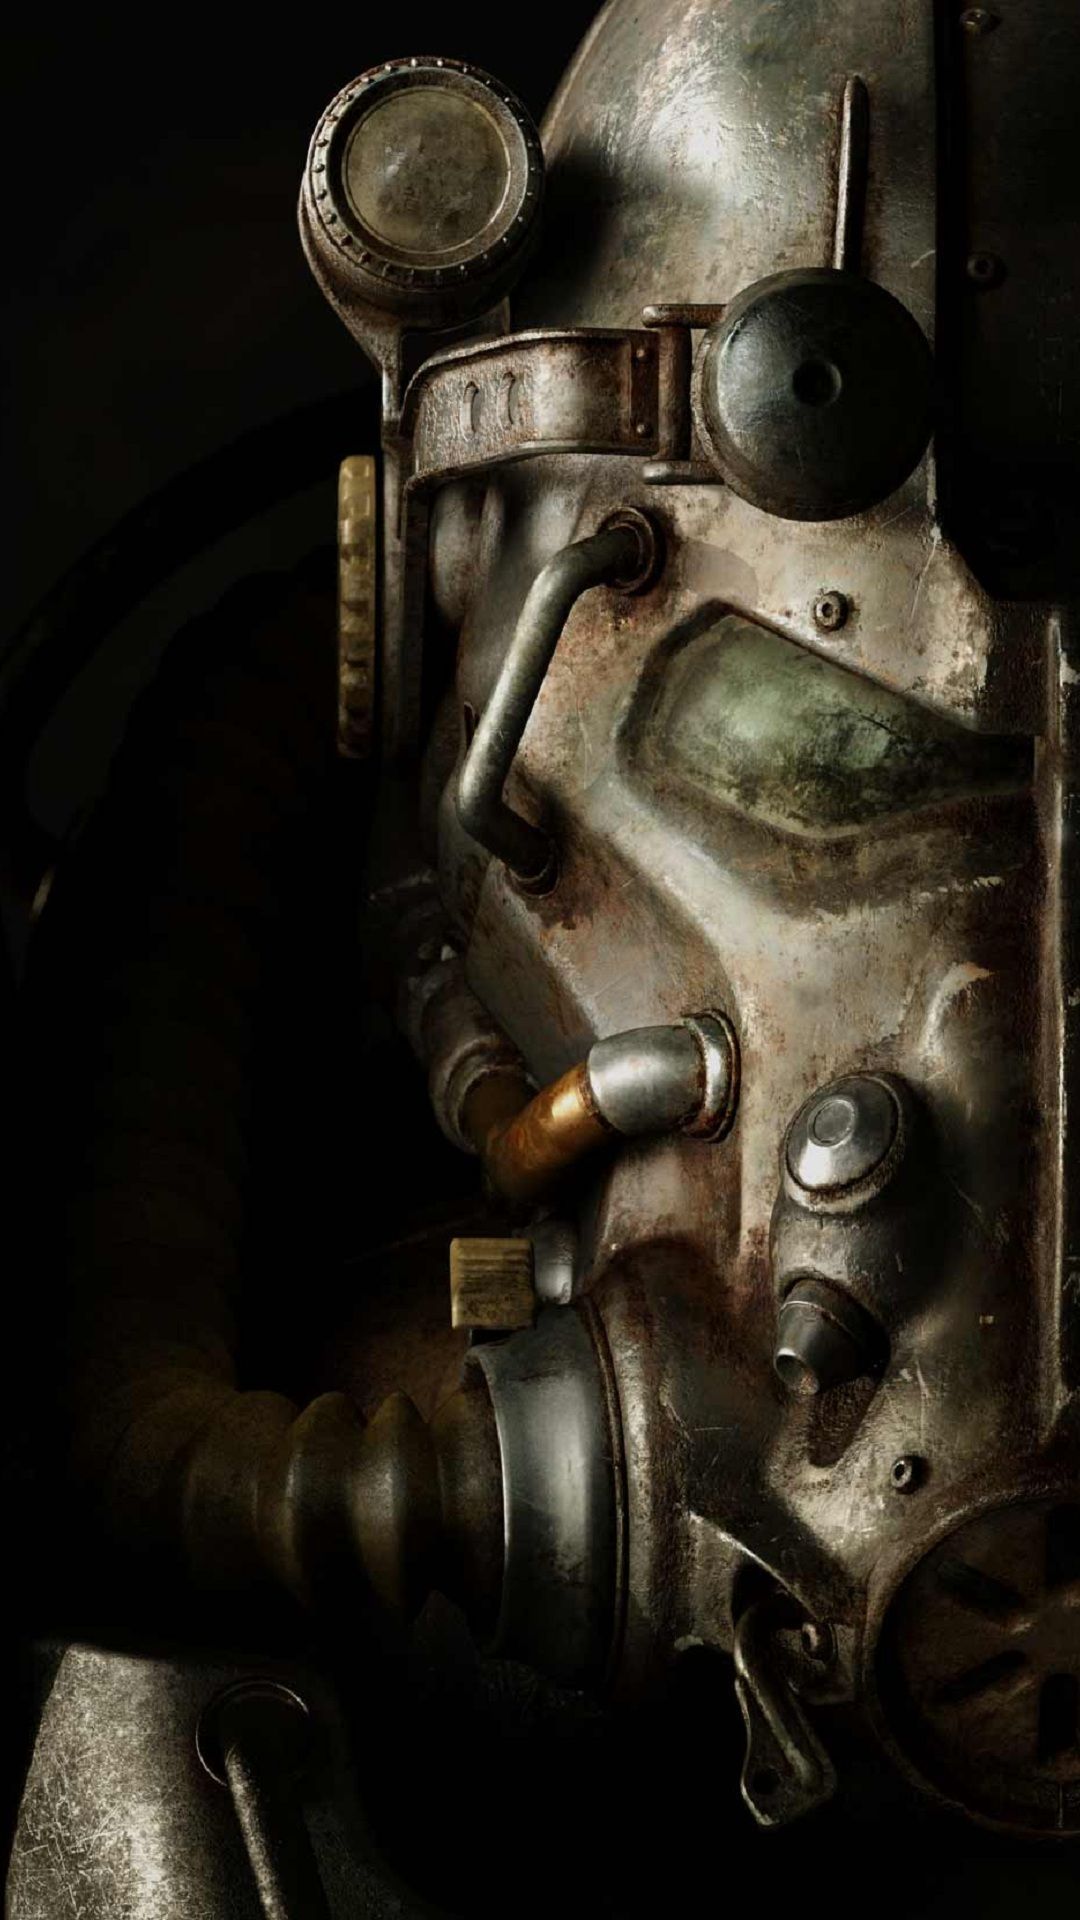 Fallout 4 Wallpaper Mobile Iphone 6s galaxy HD iPhones Backgrounds